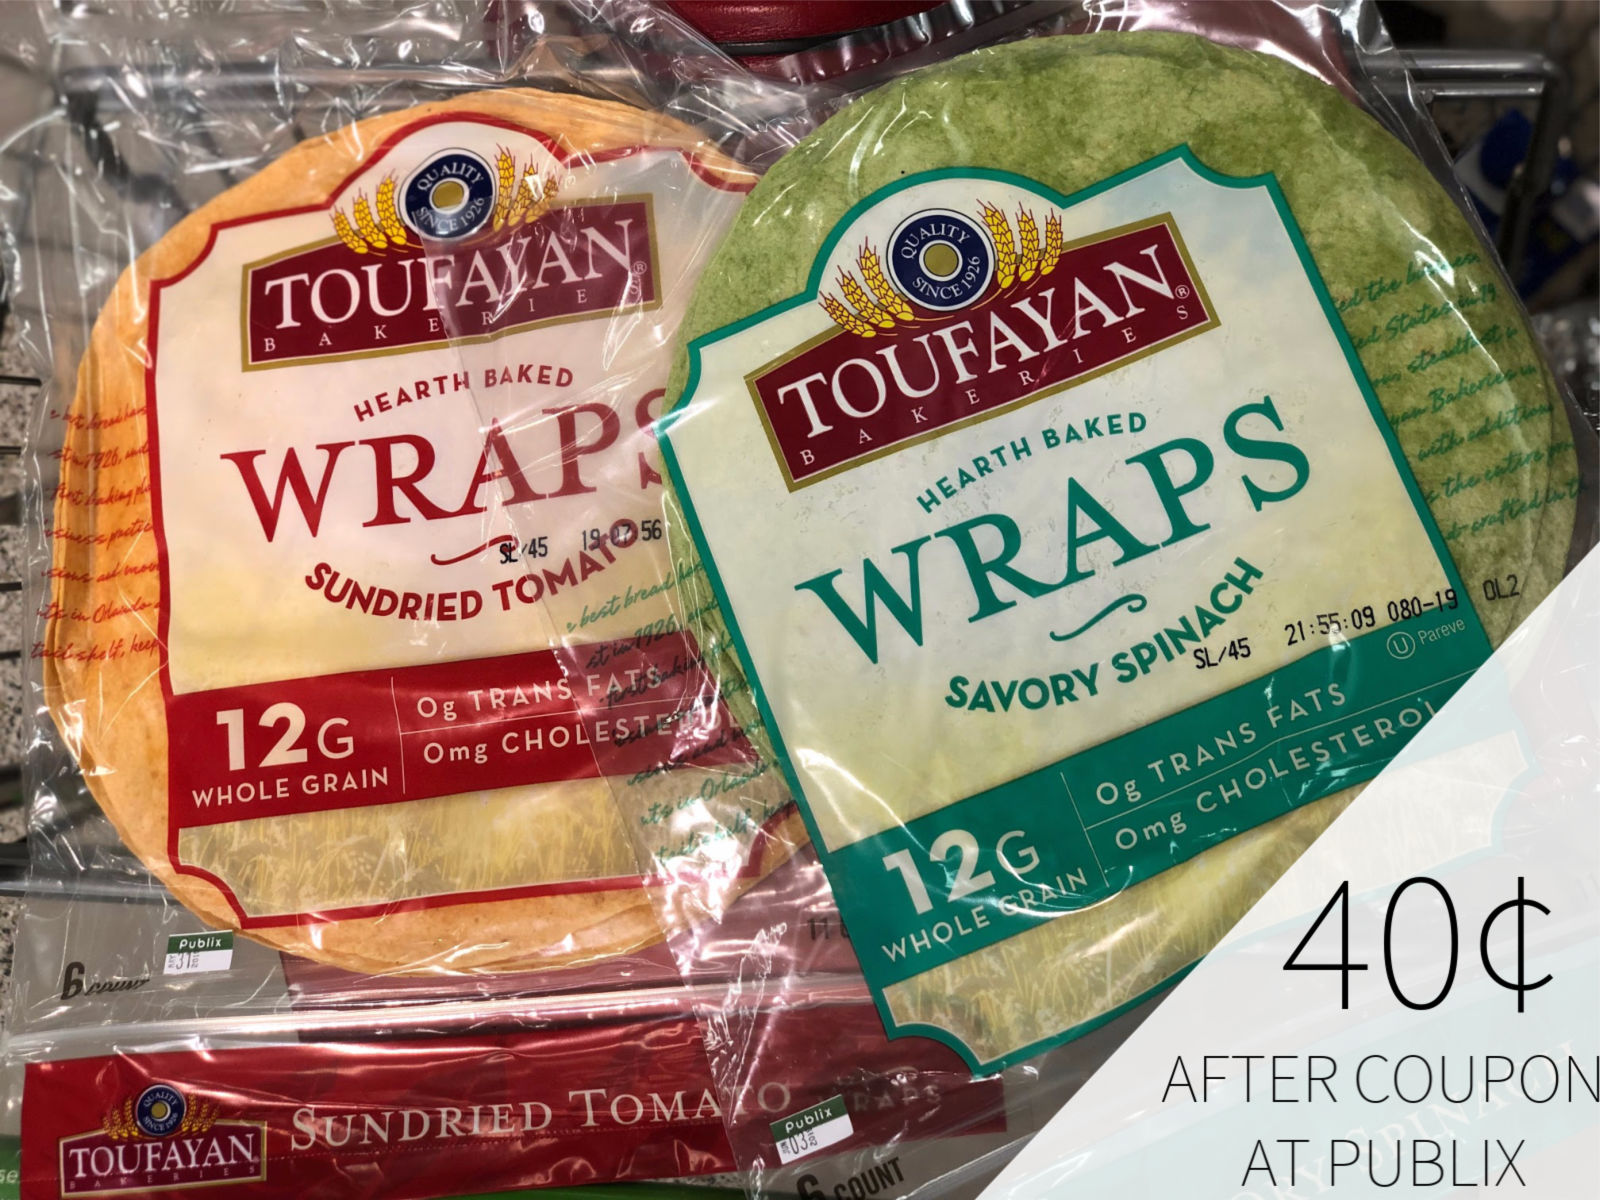 Can't Miss Deal On Toufayan Wraps At Publix - BOGO Sale Make Each Package Just $1.15 on I Heart Publix